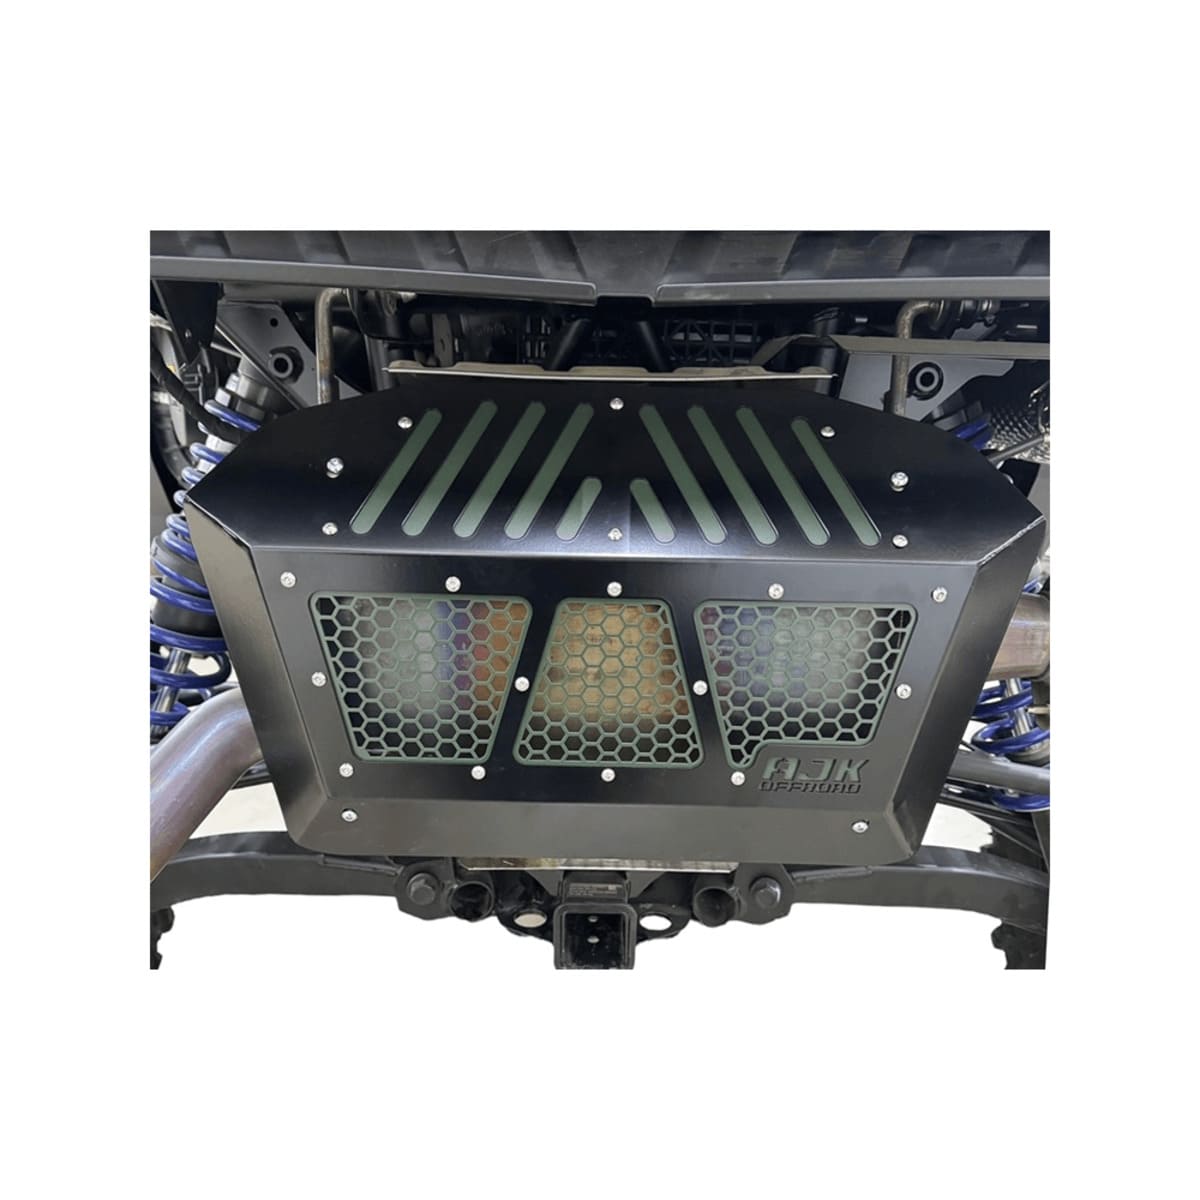 AJK Offroad Polaris Xpedition Exhaust Cover